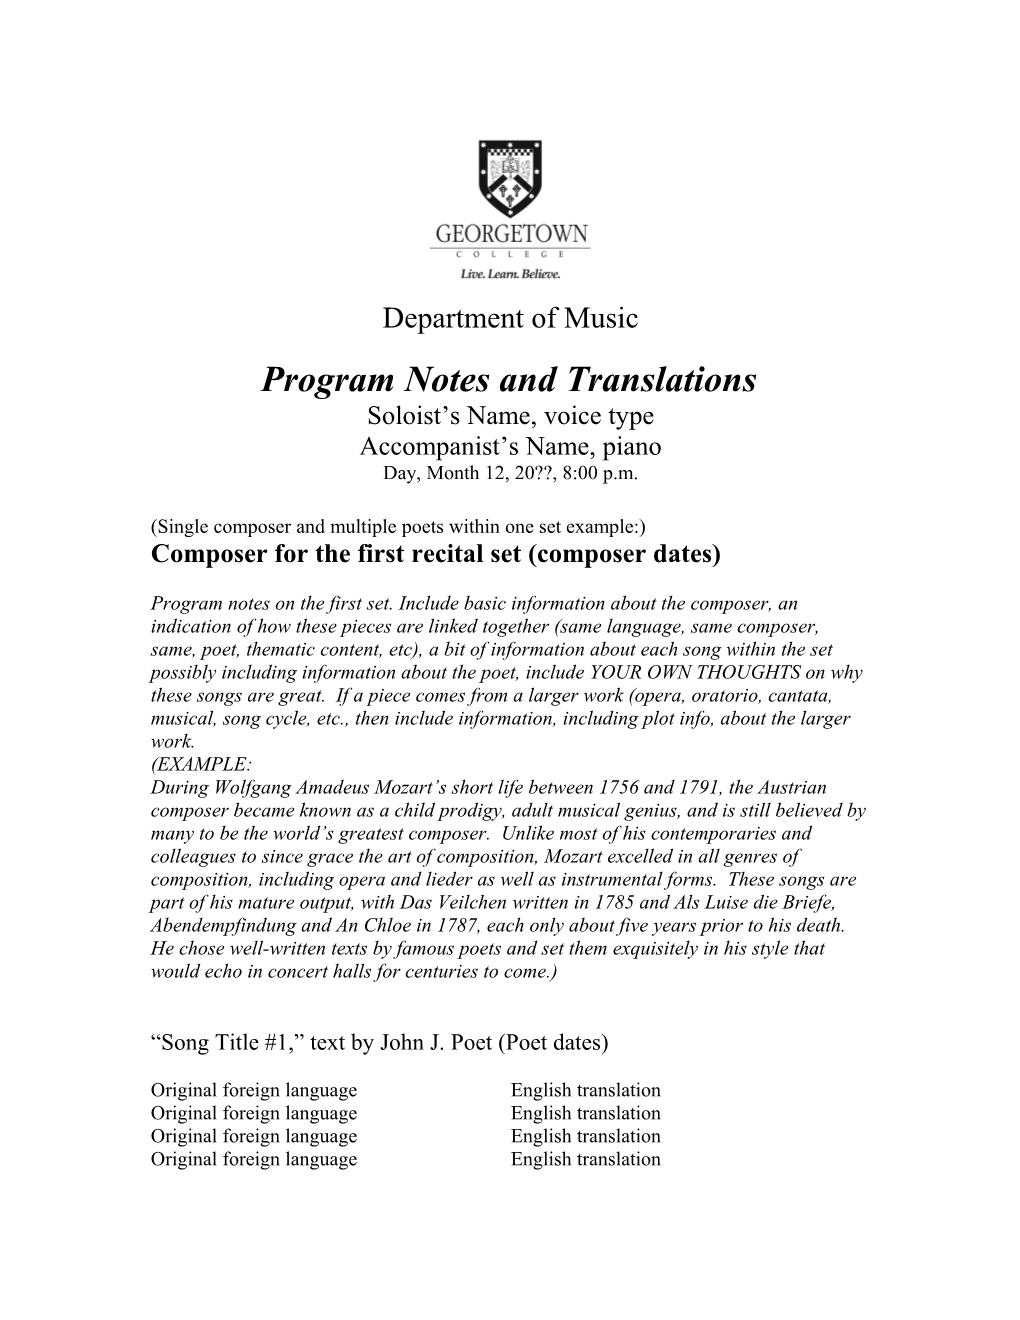 Program Notes and Translations